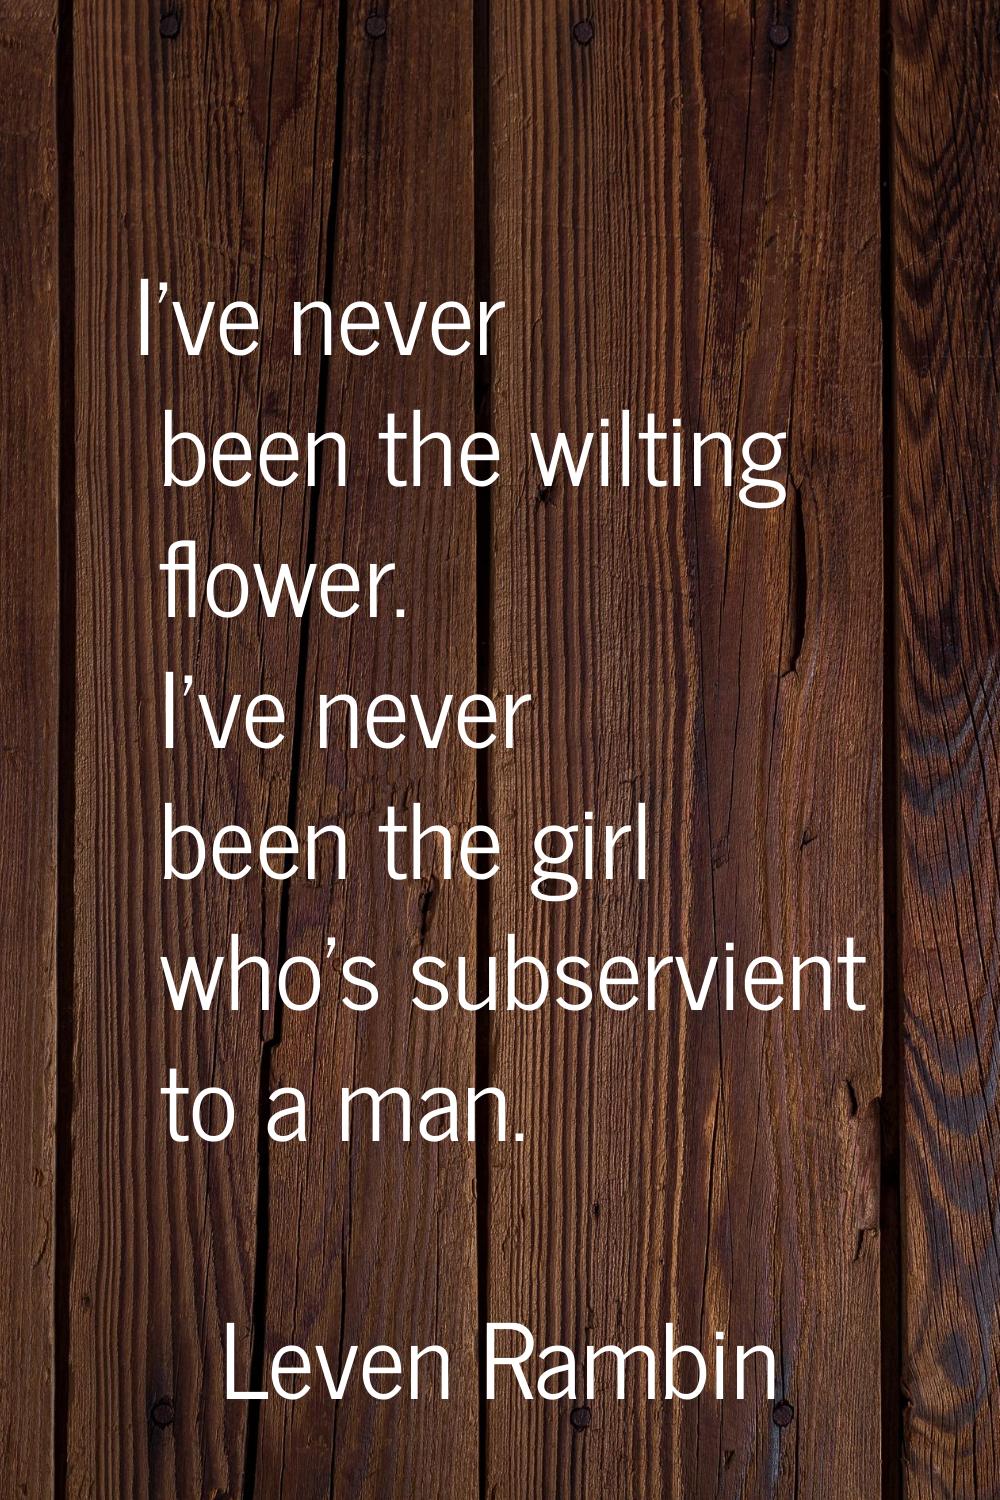 I've never been the wilting flower. I've never been the girl who's subservient to a man.